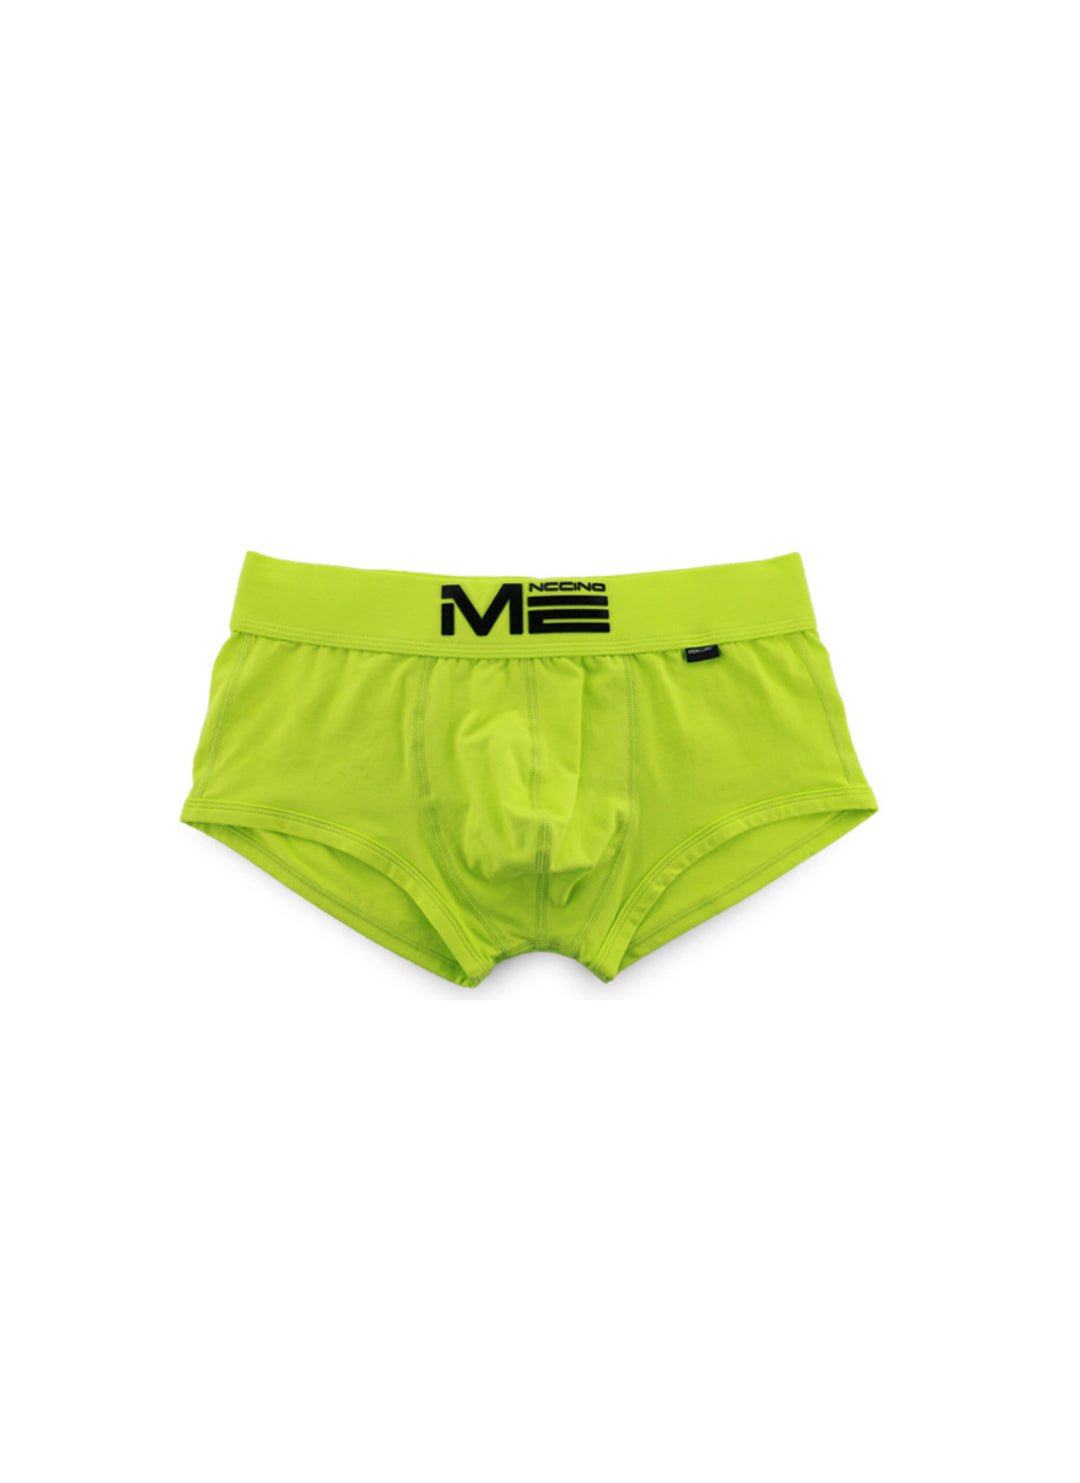 Menccino Low-Rise Cotton Boxerbrief Trunk